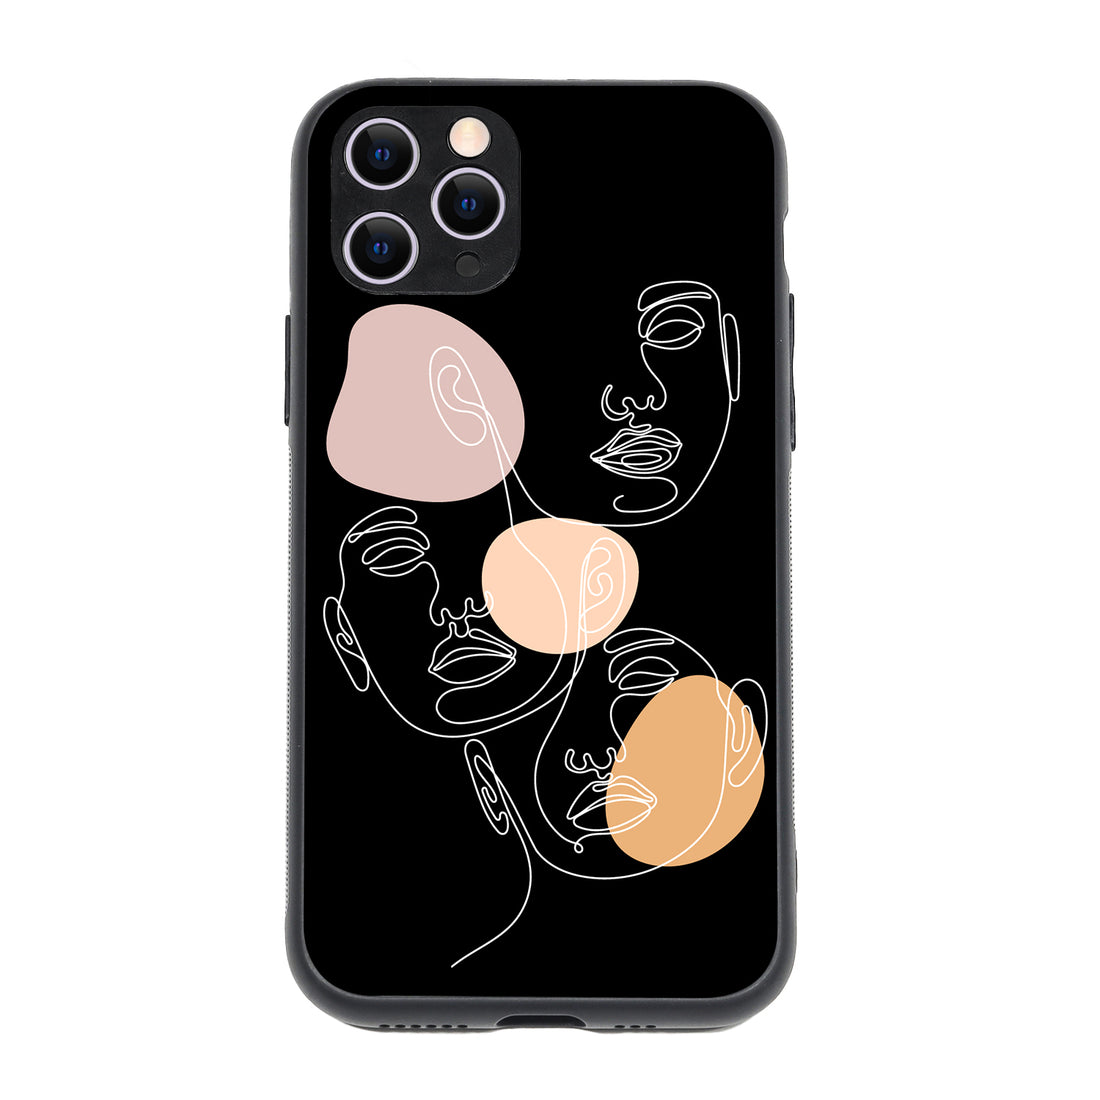 Face Aesthetic Human iPhone 11 Pro Case